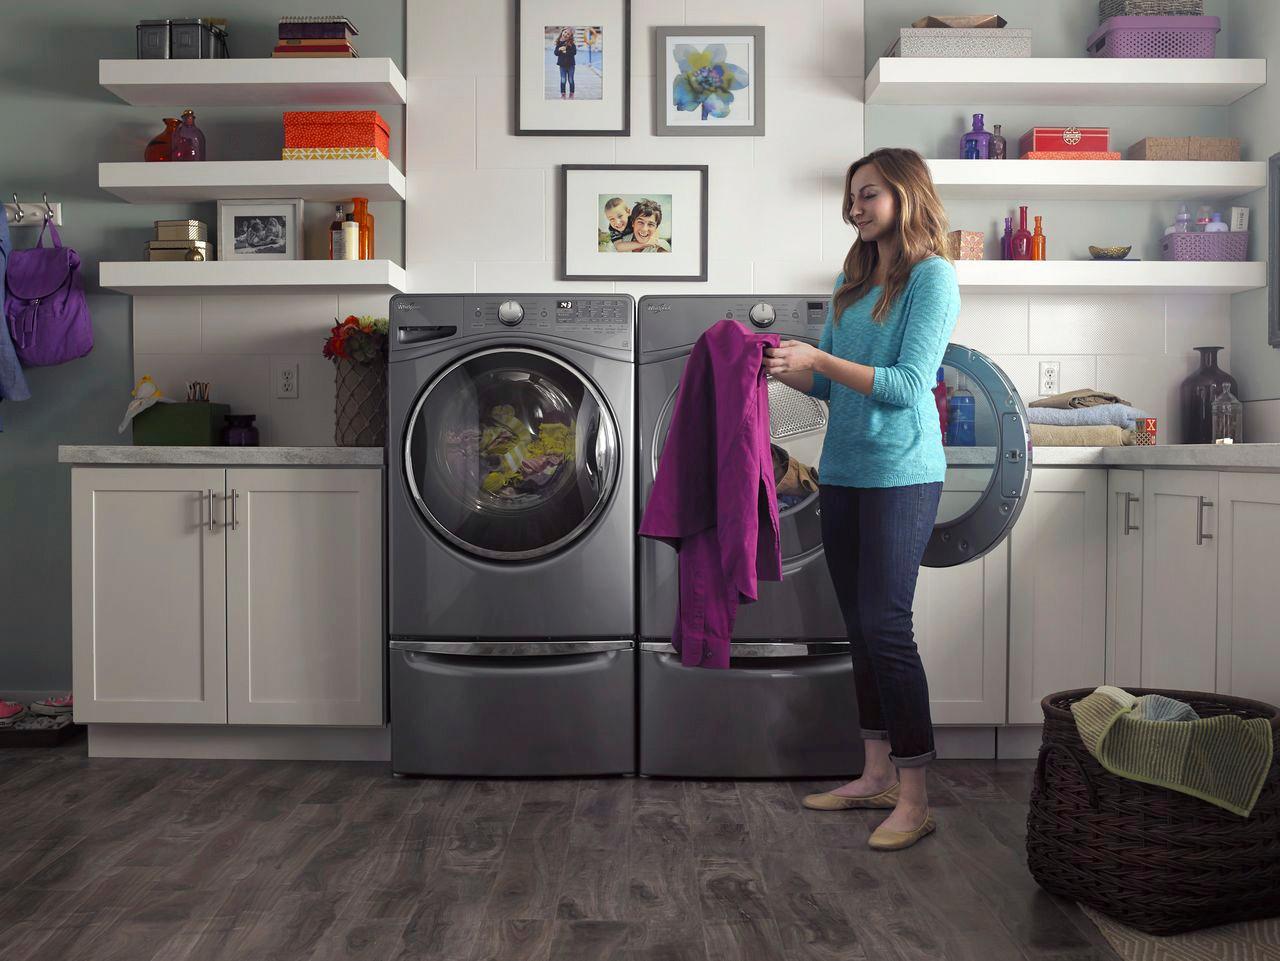 Whirlpool 4.5-cu ft High Efficiency Stackable Steam Cycle Front-Load Washer  (Chrome Shadow) ENERGY STAR in the Front-Load Washers department at